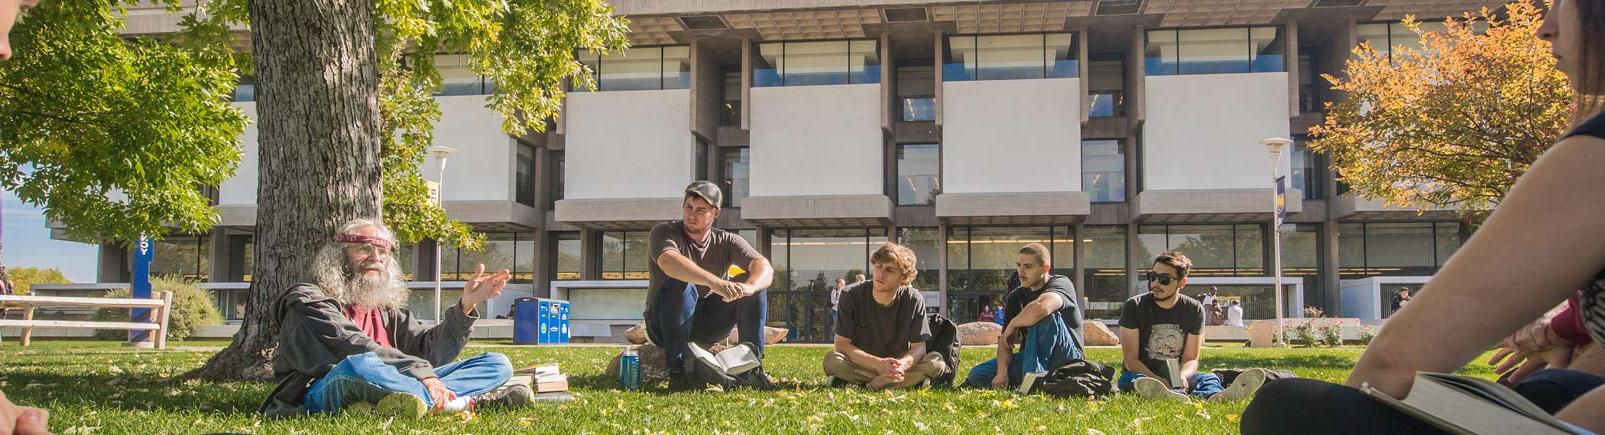 Students gathered under tree near Michener Library